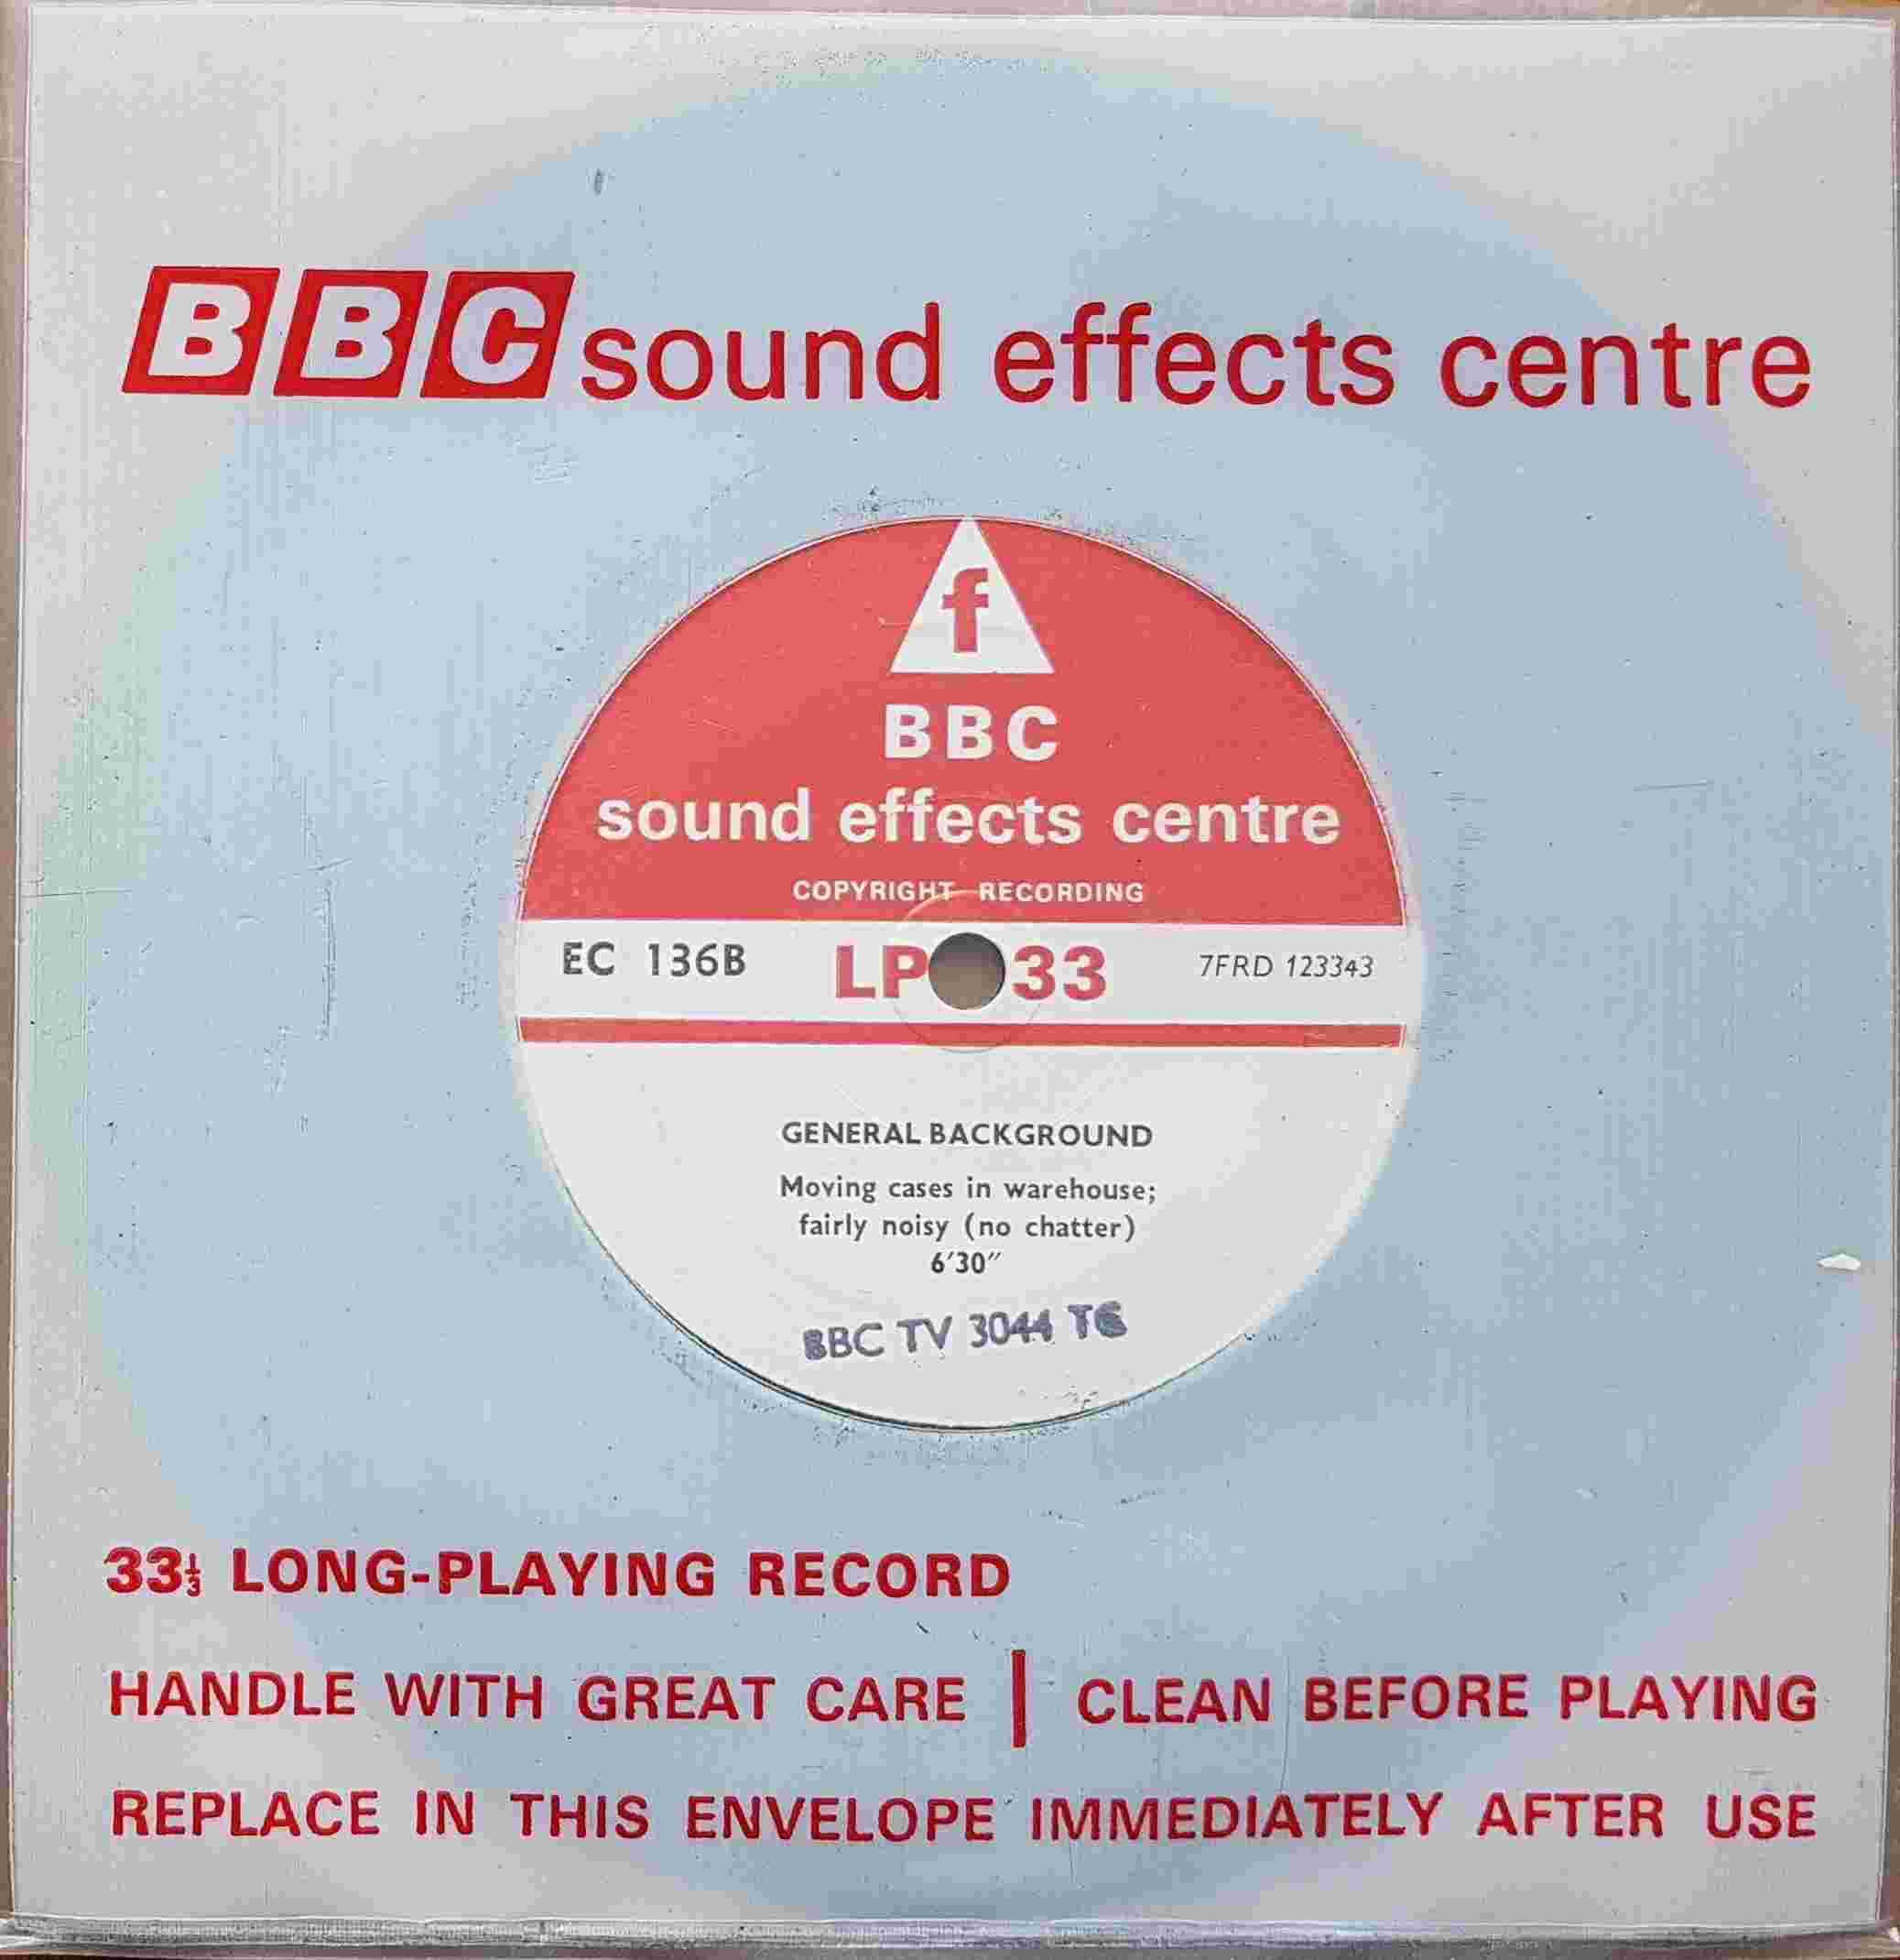 Picture of EC 136B General background by artist Not registered from the BBC records and Tapes library